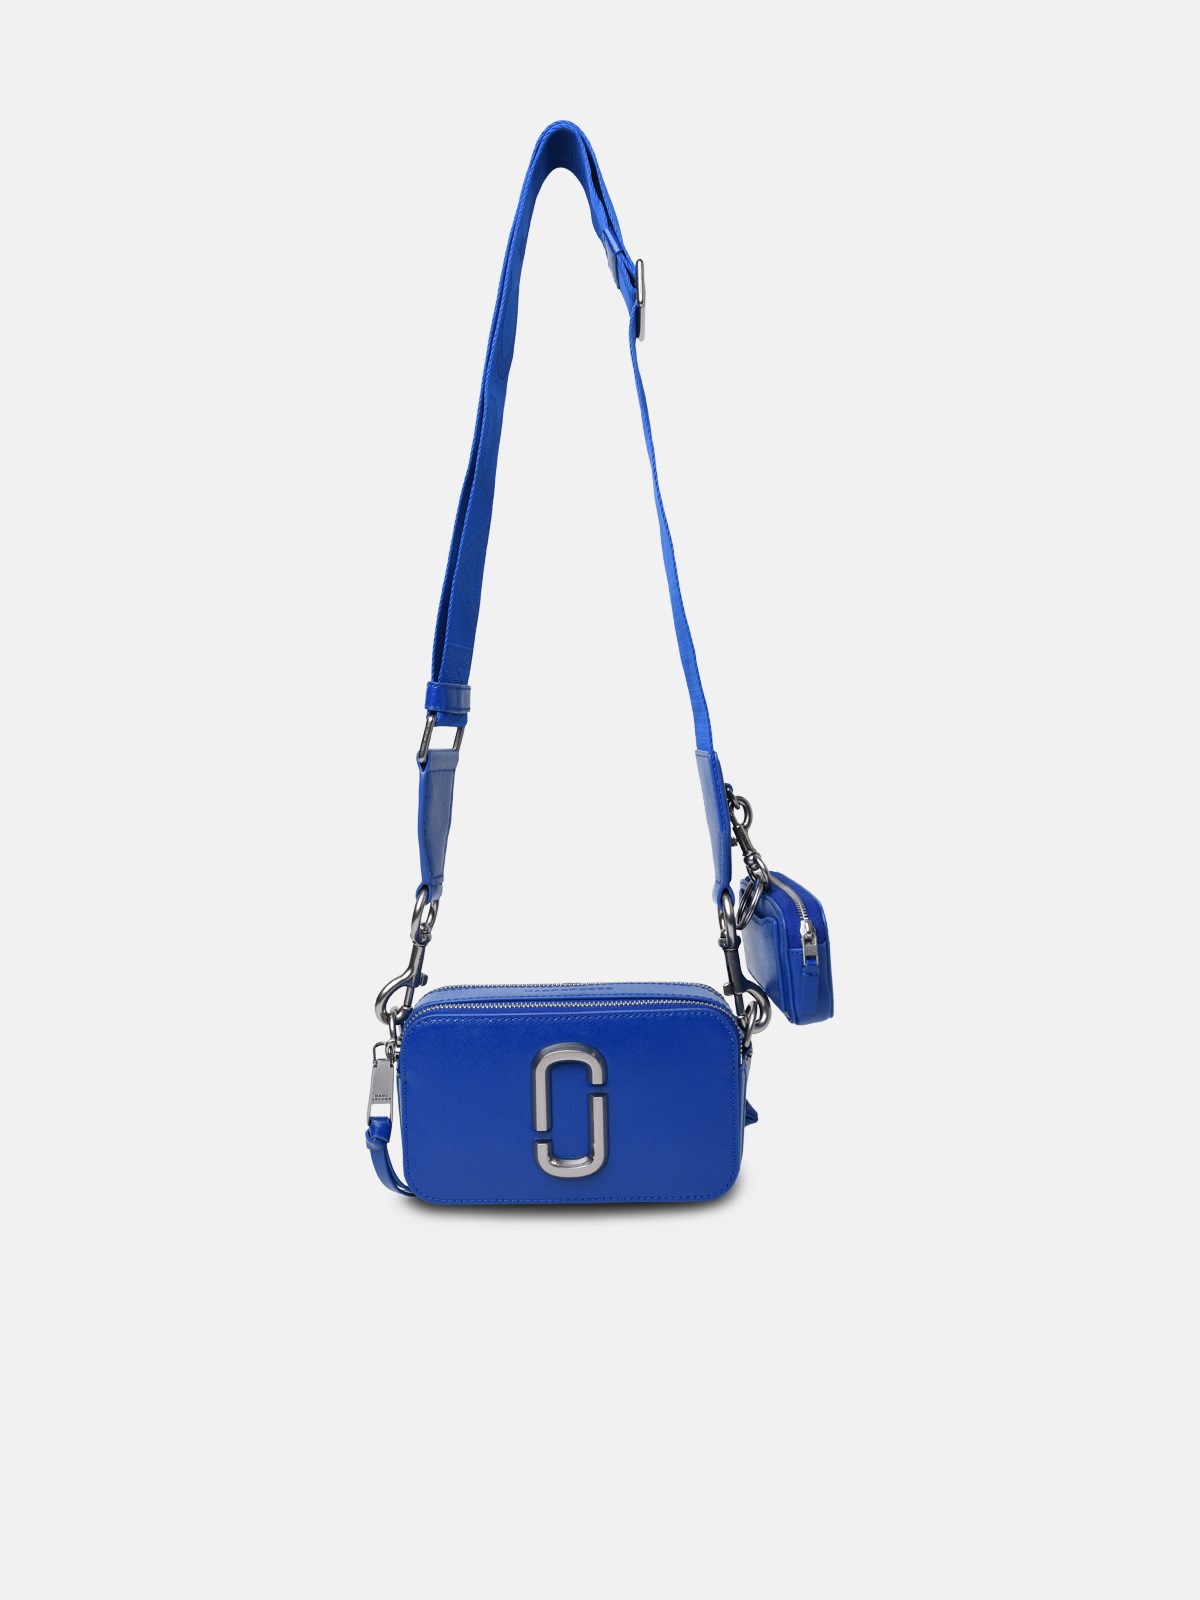 Marc Jacobs (the) 'utility Snapshot' Blue Saffiano Leather Bag